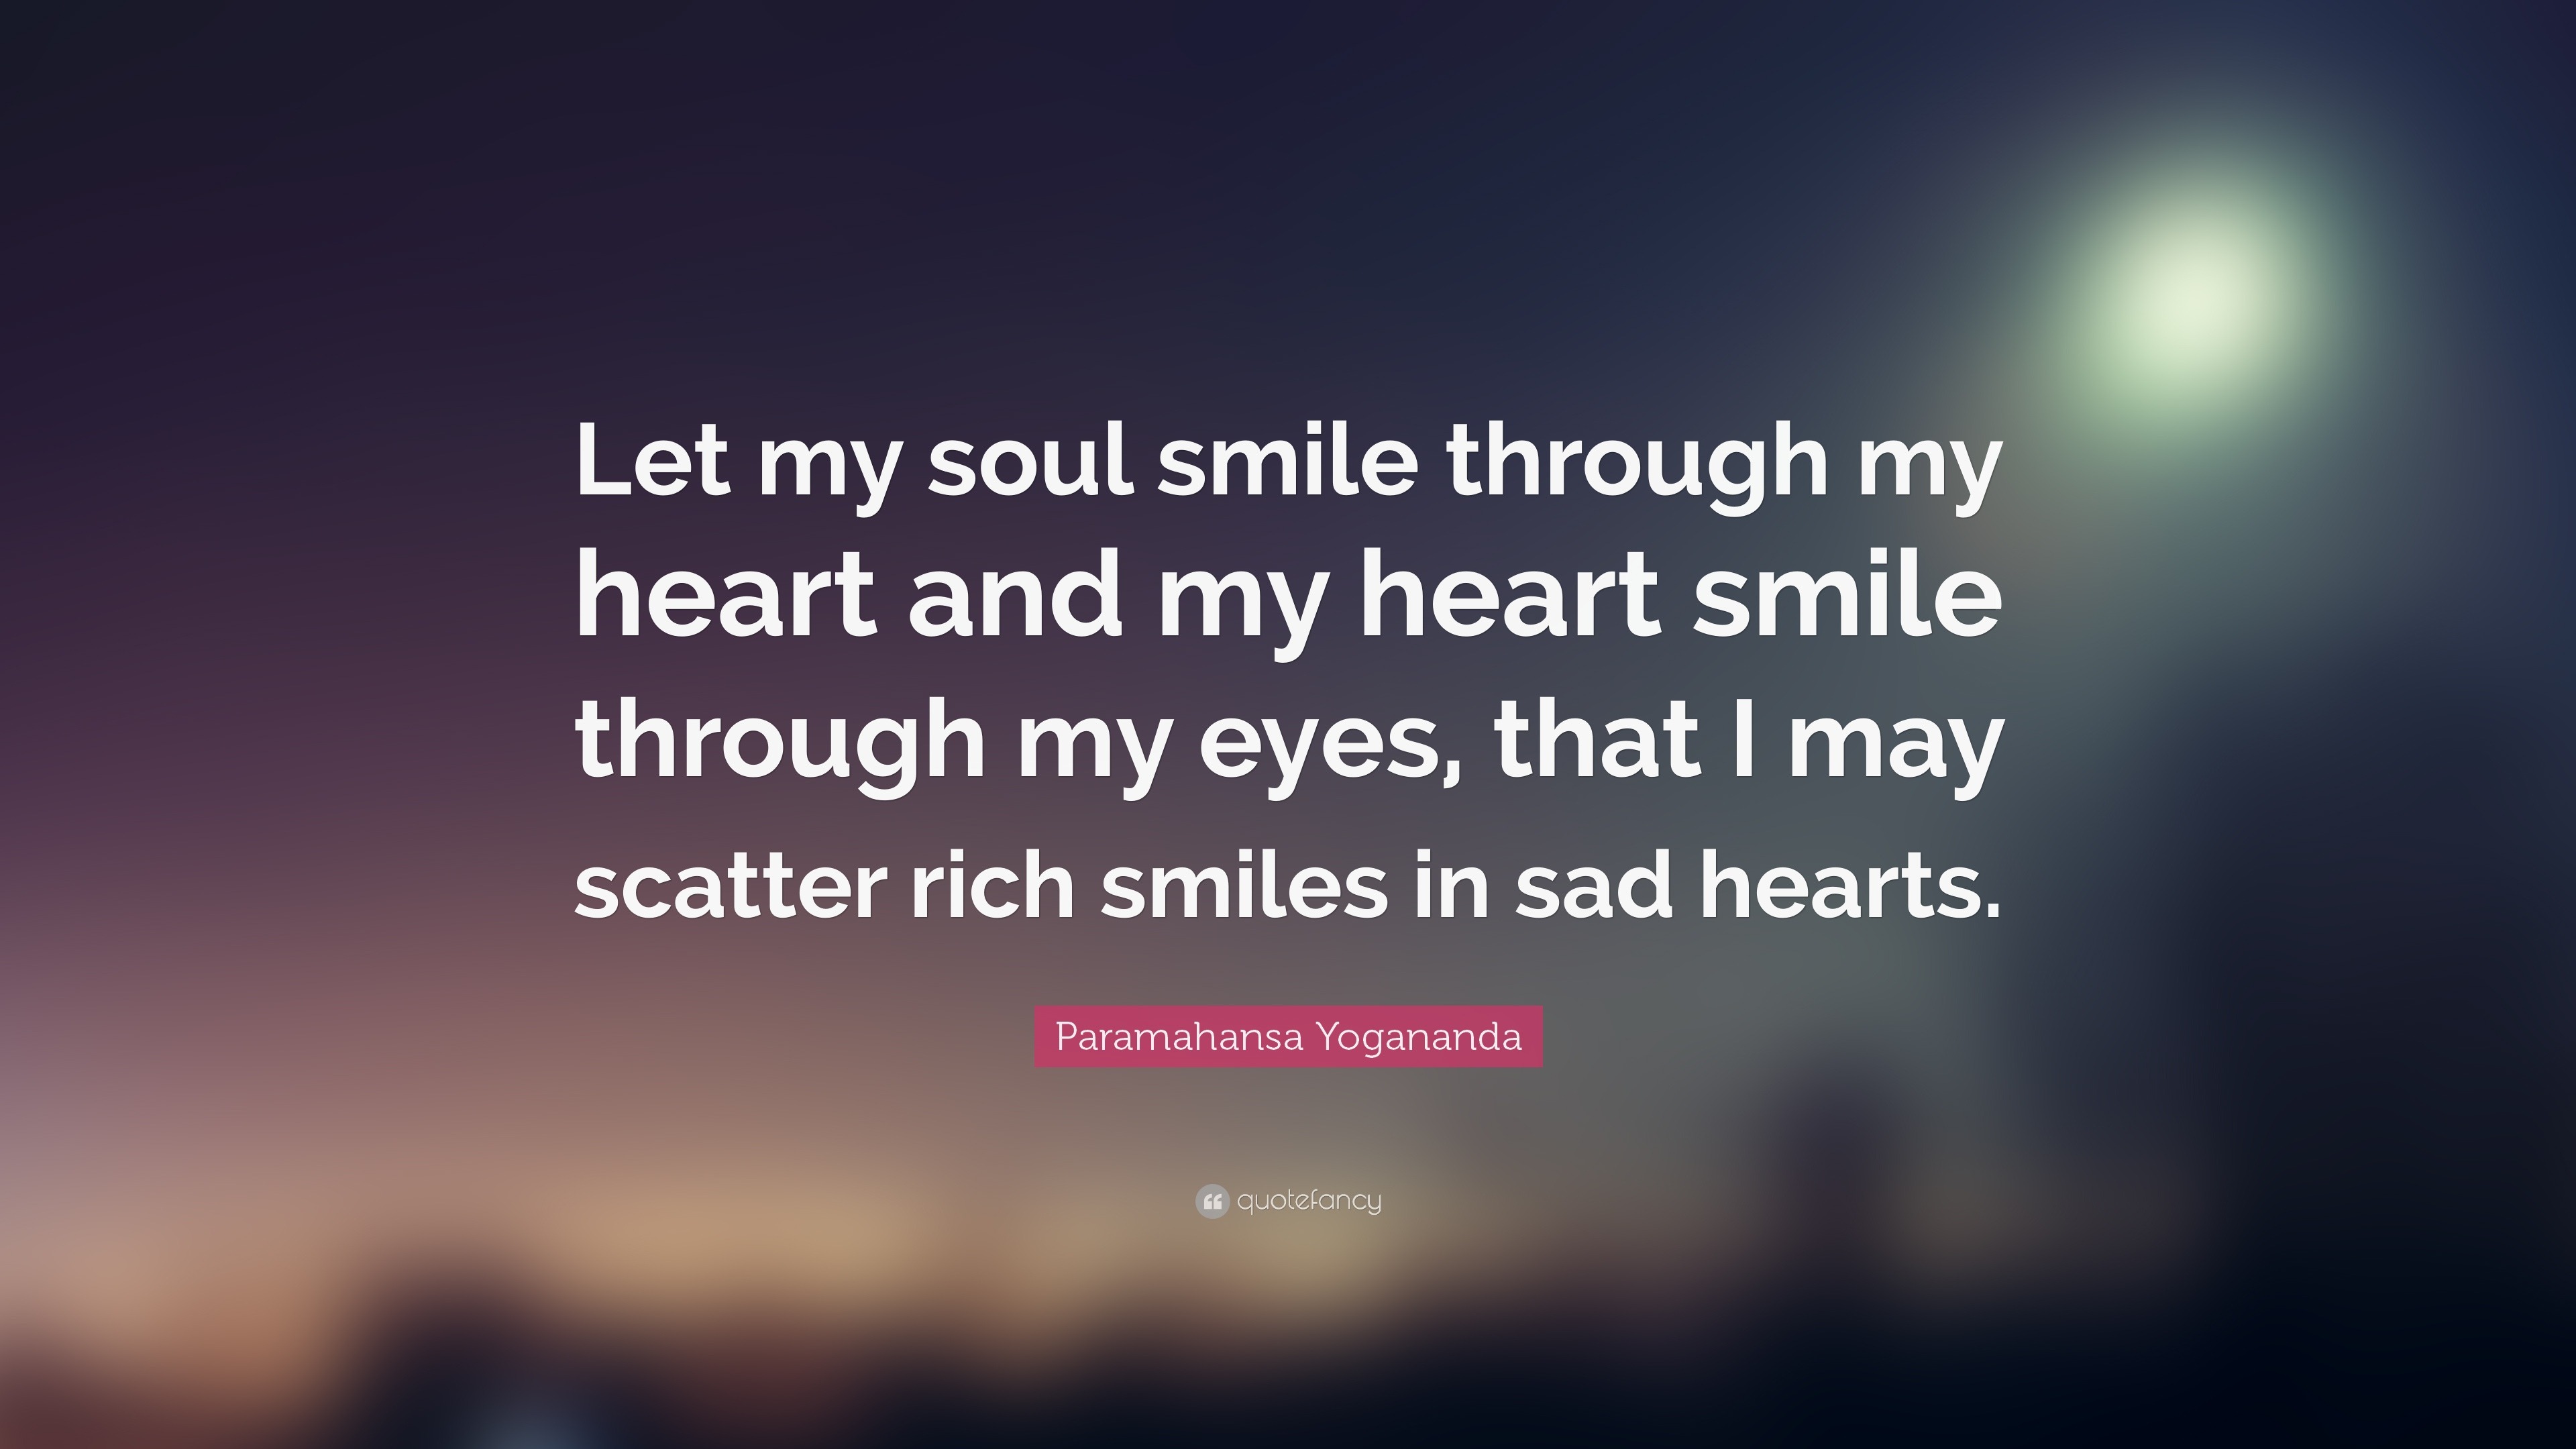 Paramahansa Yogananda Quote Let My Soul Smile Through My Heart And My Heart Smile